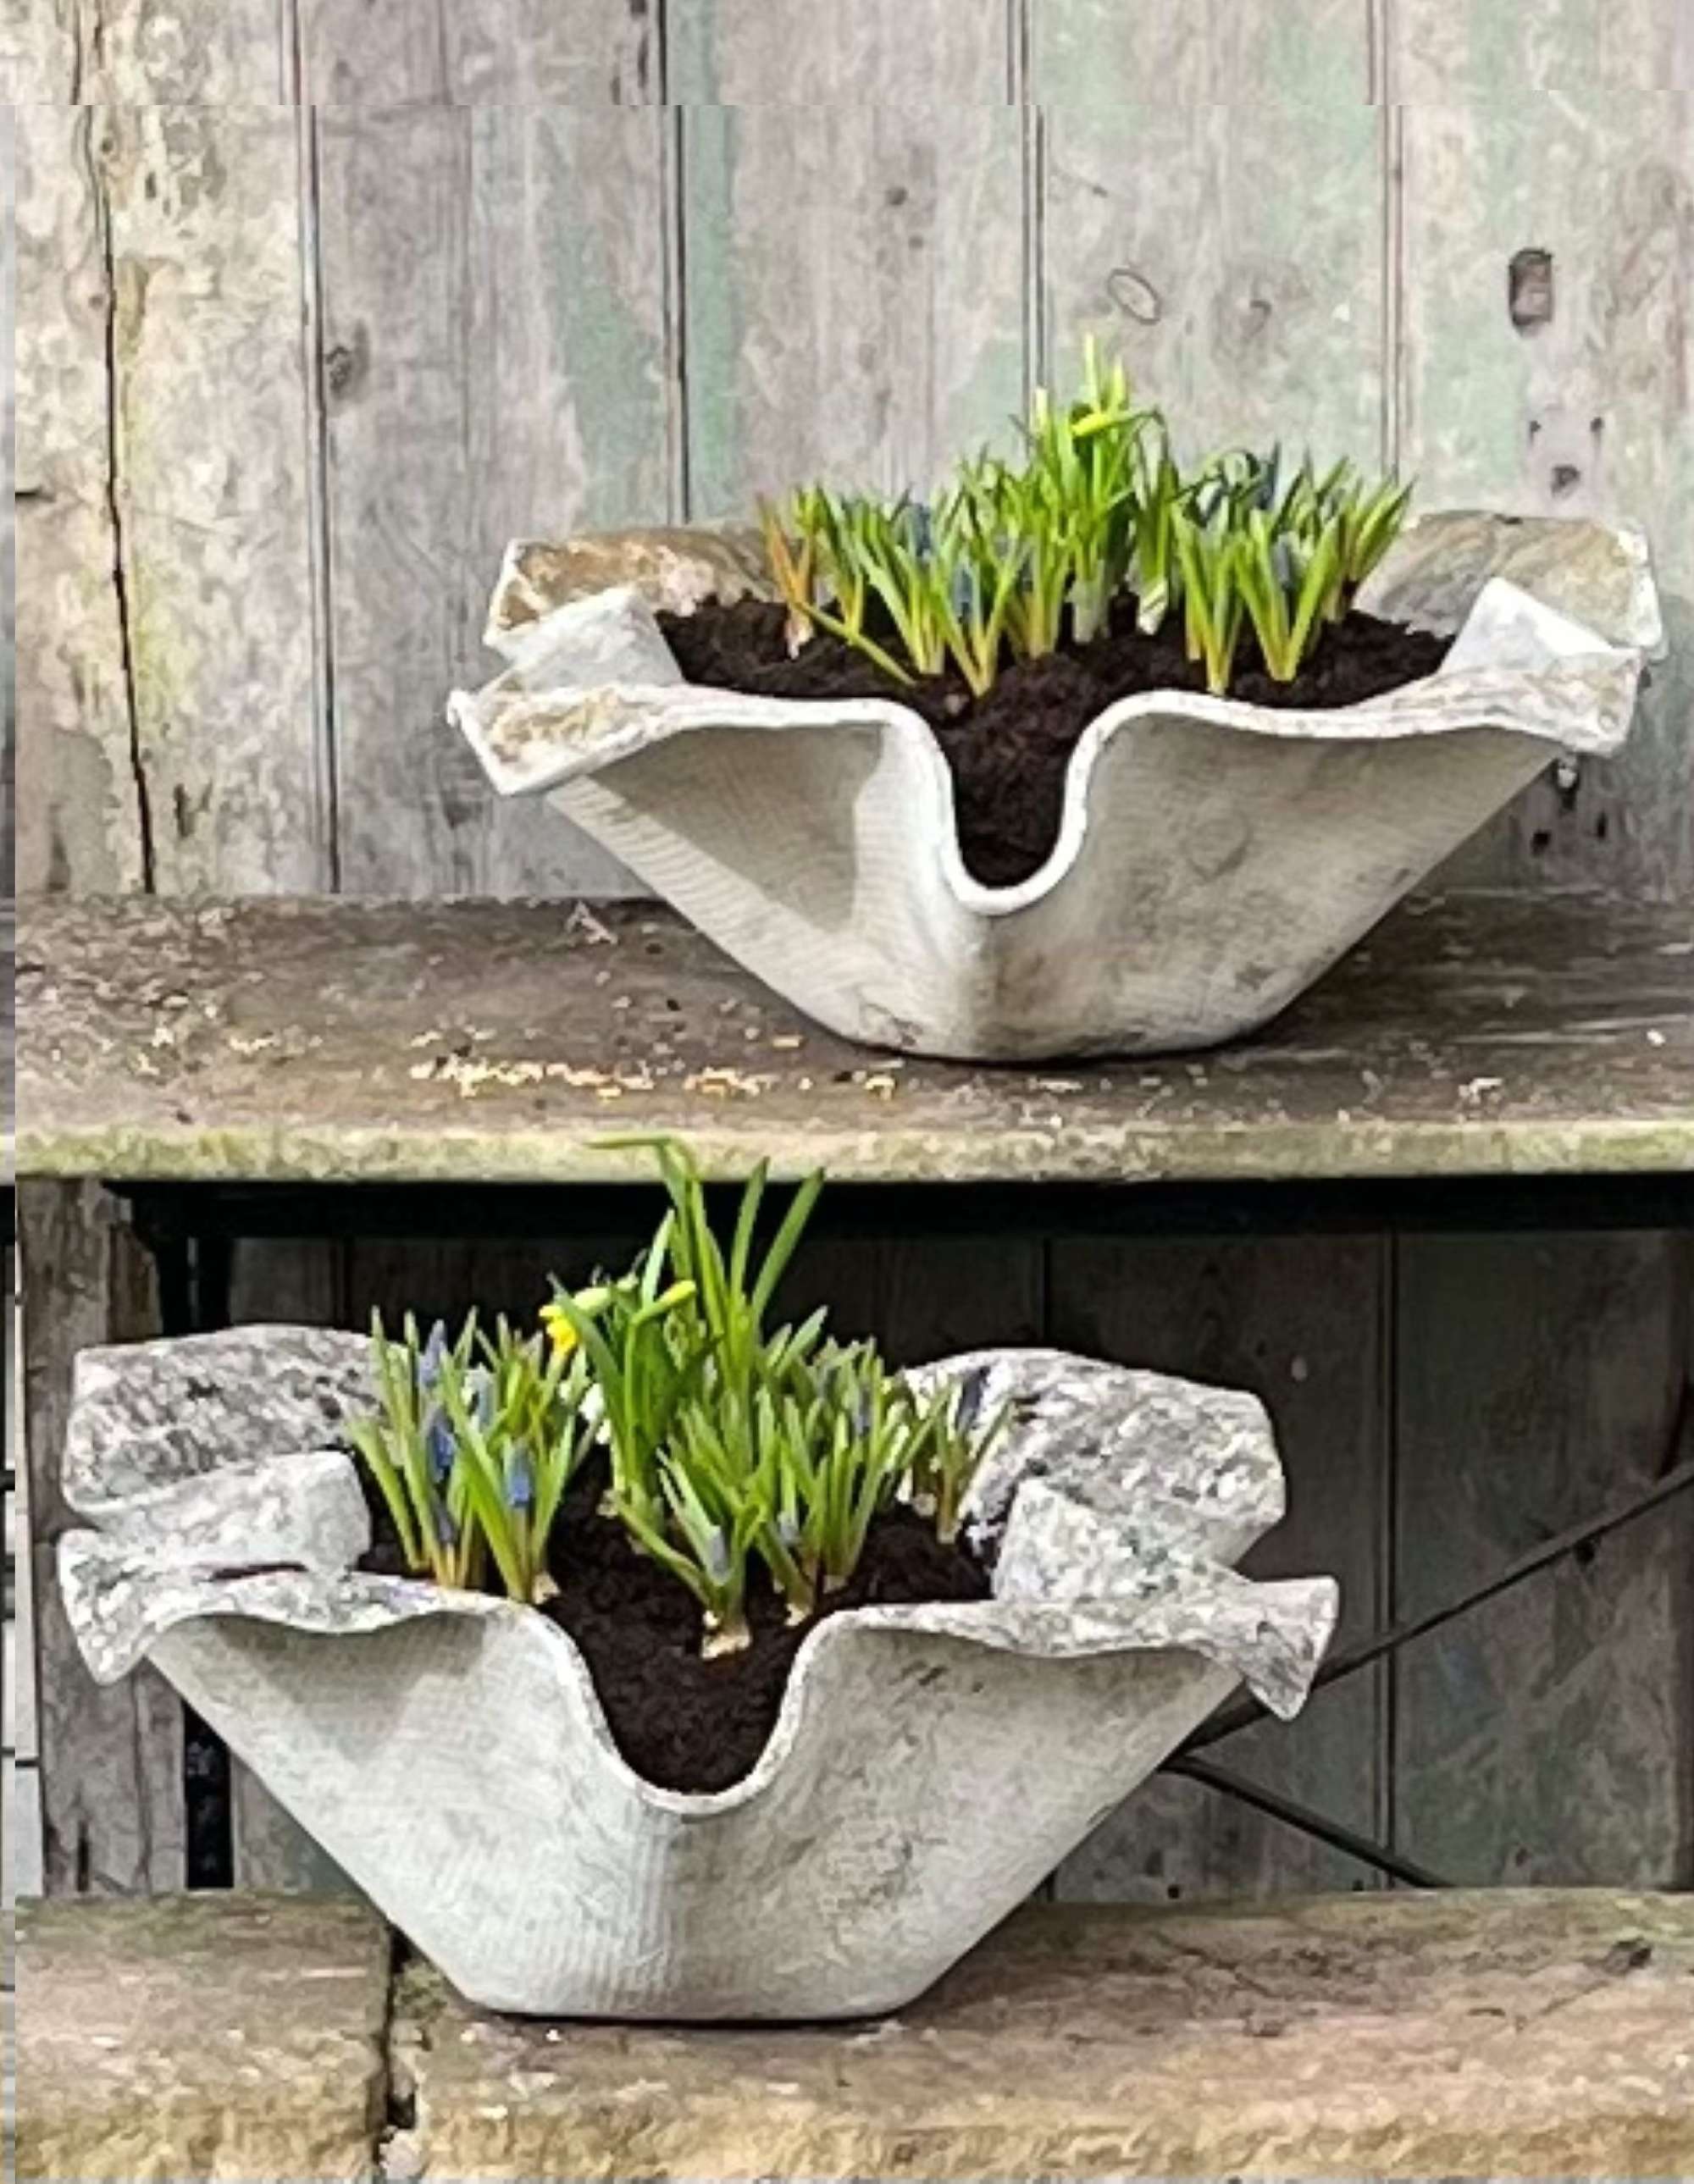 A Pair Of Sculptural 'handkerchief' Planters By Willy Guhl (1950s)